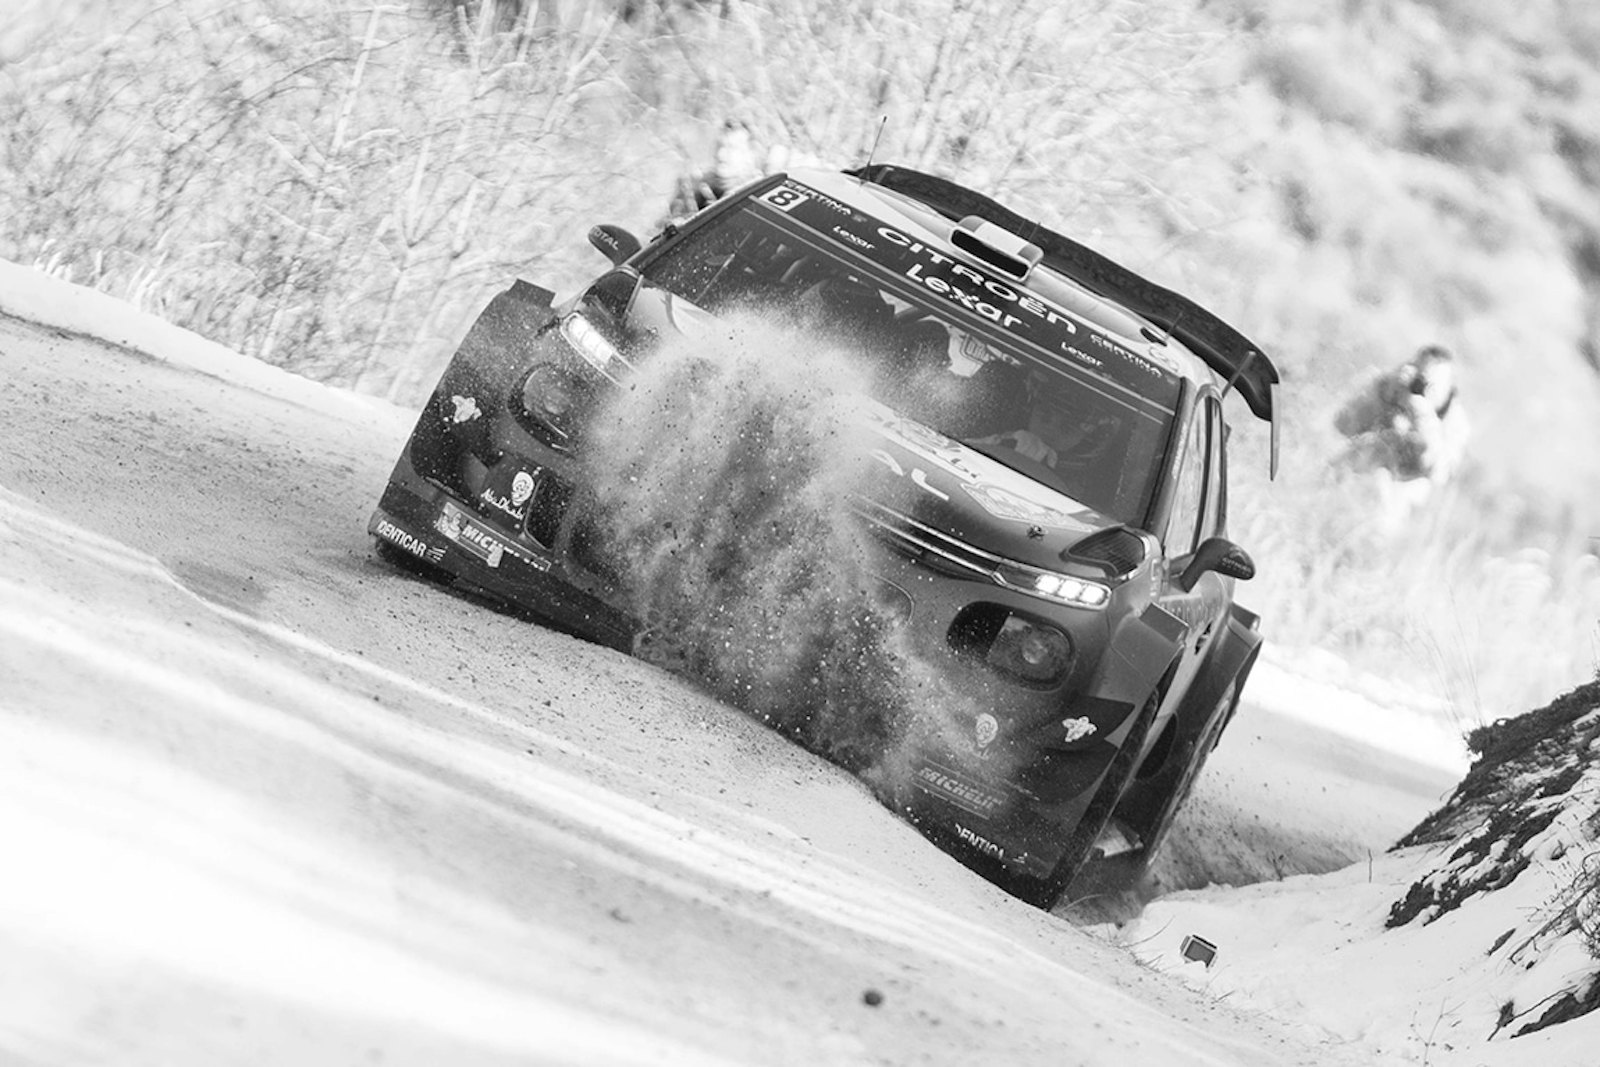 Craig Breen (IRL) competes during the FIA World Rally Championship 2017 in Monte Carlo, Monaco on January 21, 2017 // Jaanus Ree/Red Bull Content Pool // P-20170122-00666 // Usage for editorial use only // Please go to www.redbullcontentpool.com for further information. //